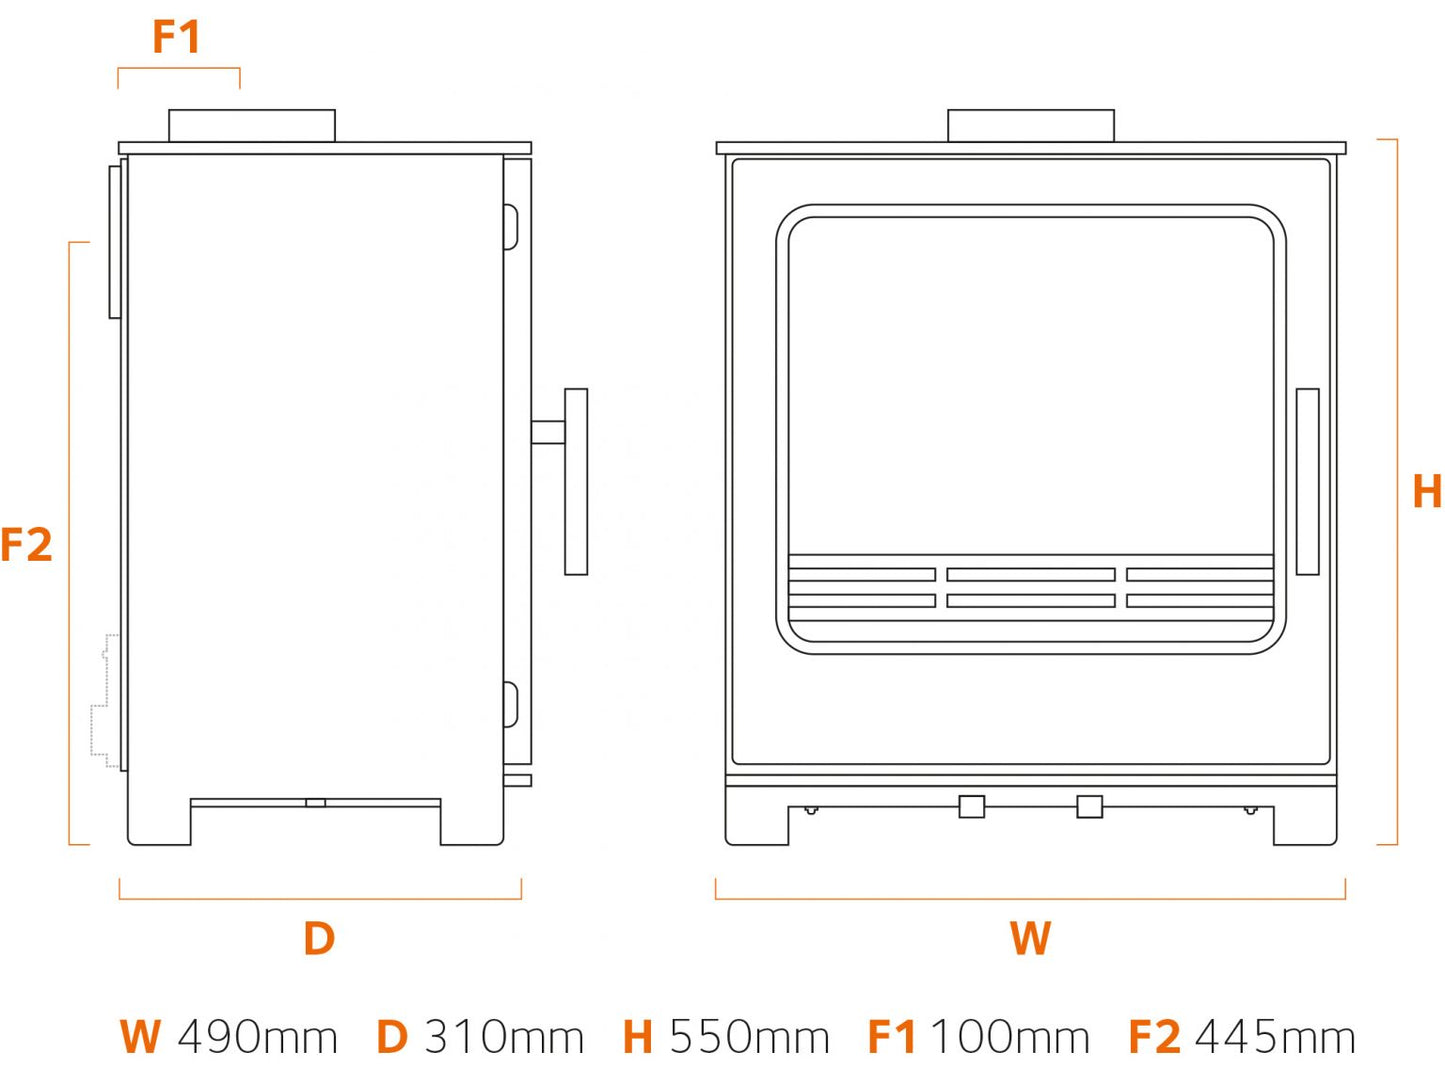 Dimensions and specifications for the Buddy 5 Wide multifuel stove.